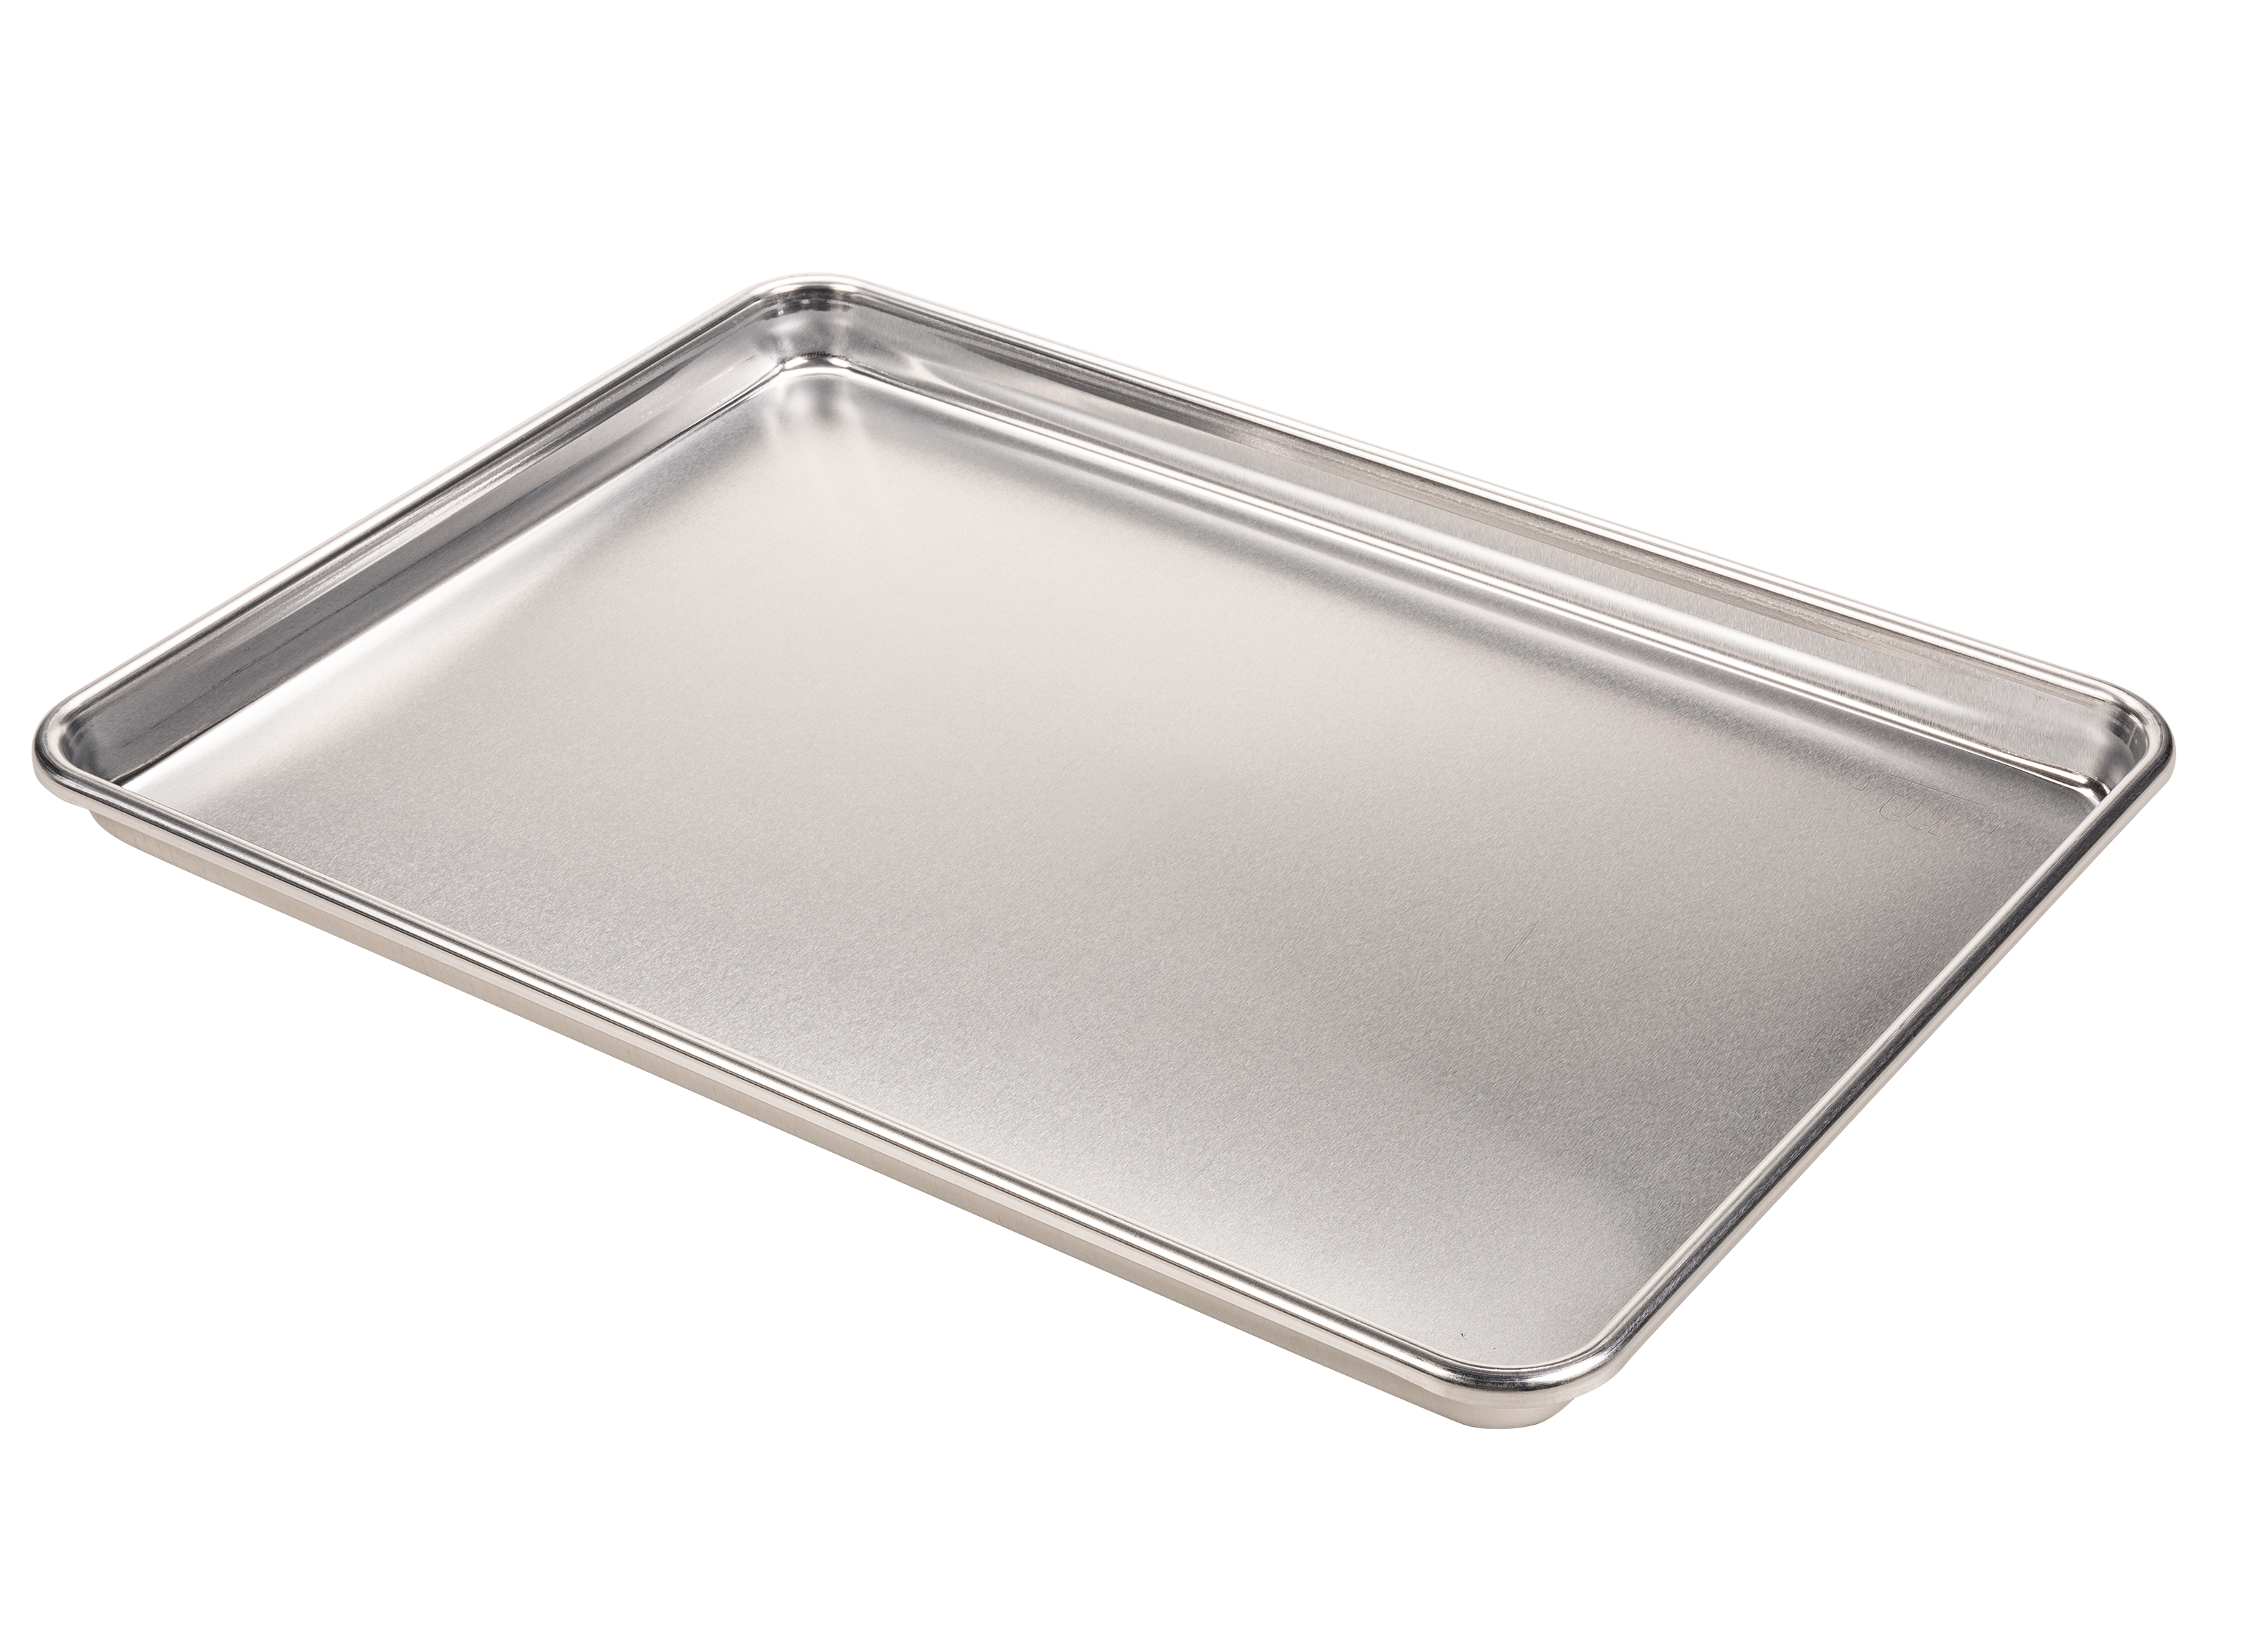 https://crdms.images.consumerreports.org/prod/products/cr/models/404170-sheet-pans-made-in-cookware-half-sheet-pan-10022104.png